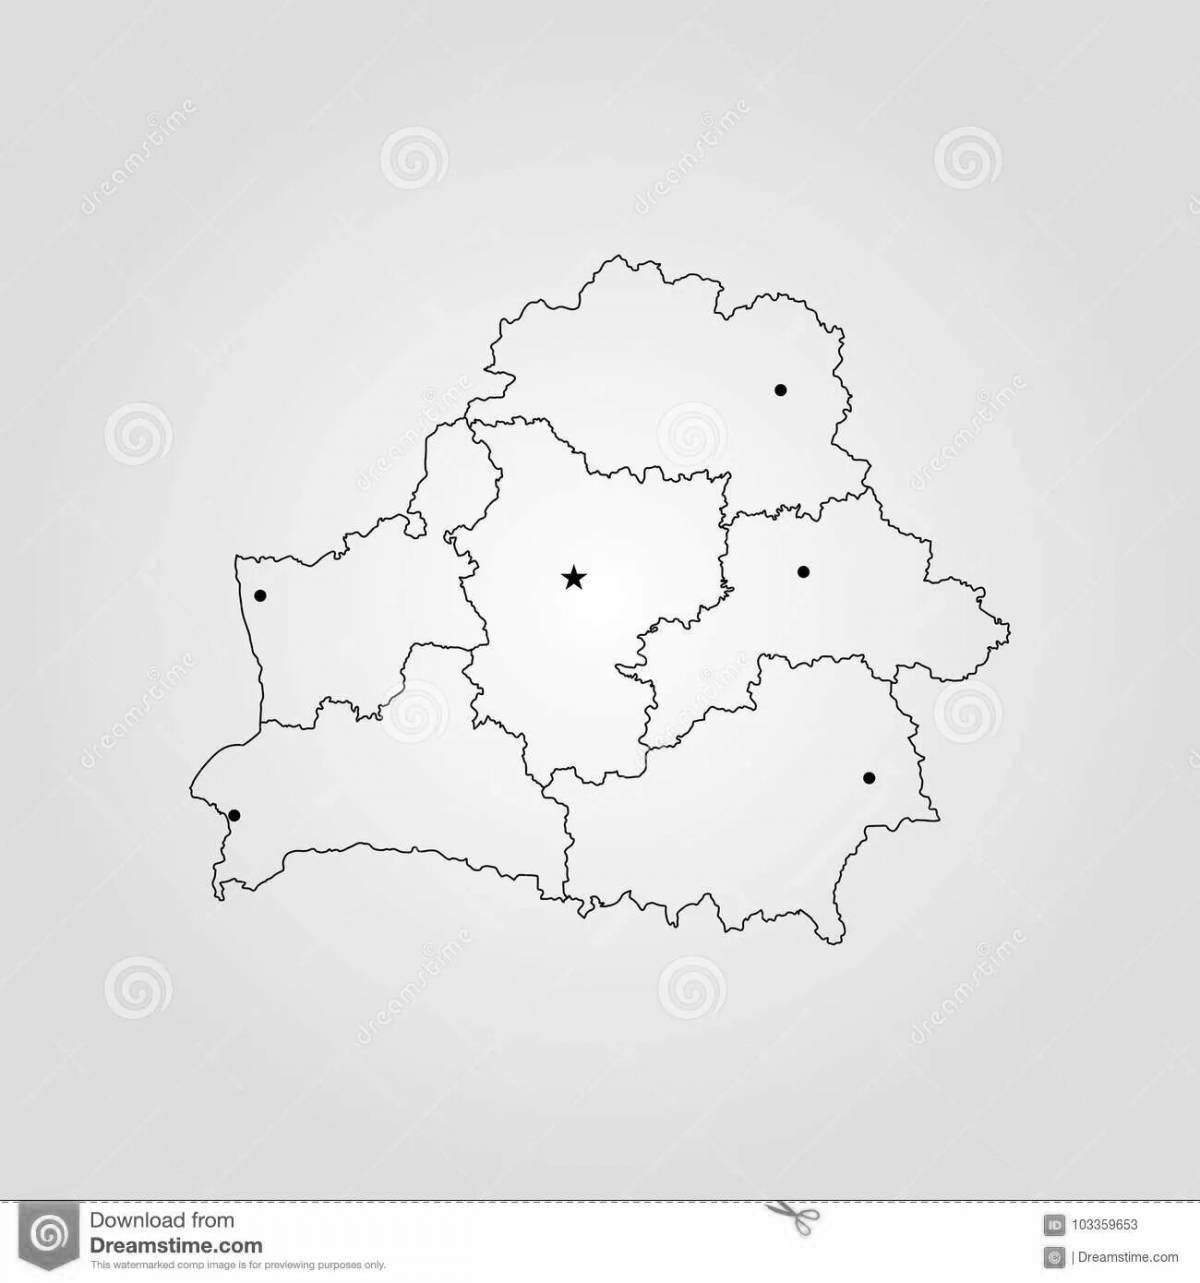 Bright coloring map of belarus for the little ones